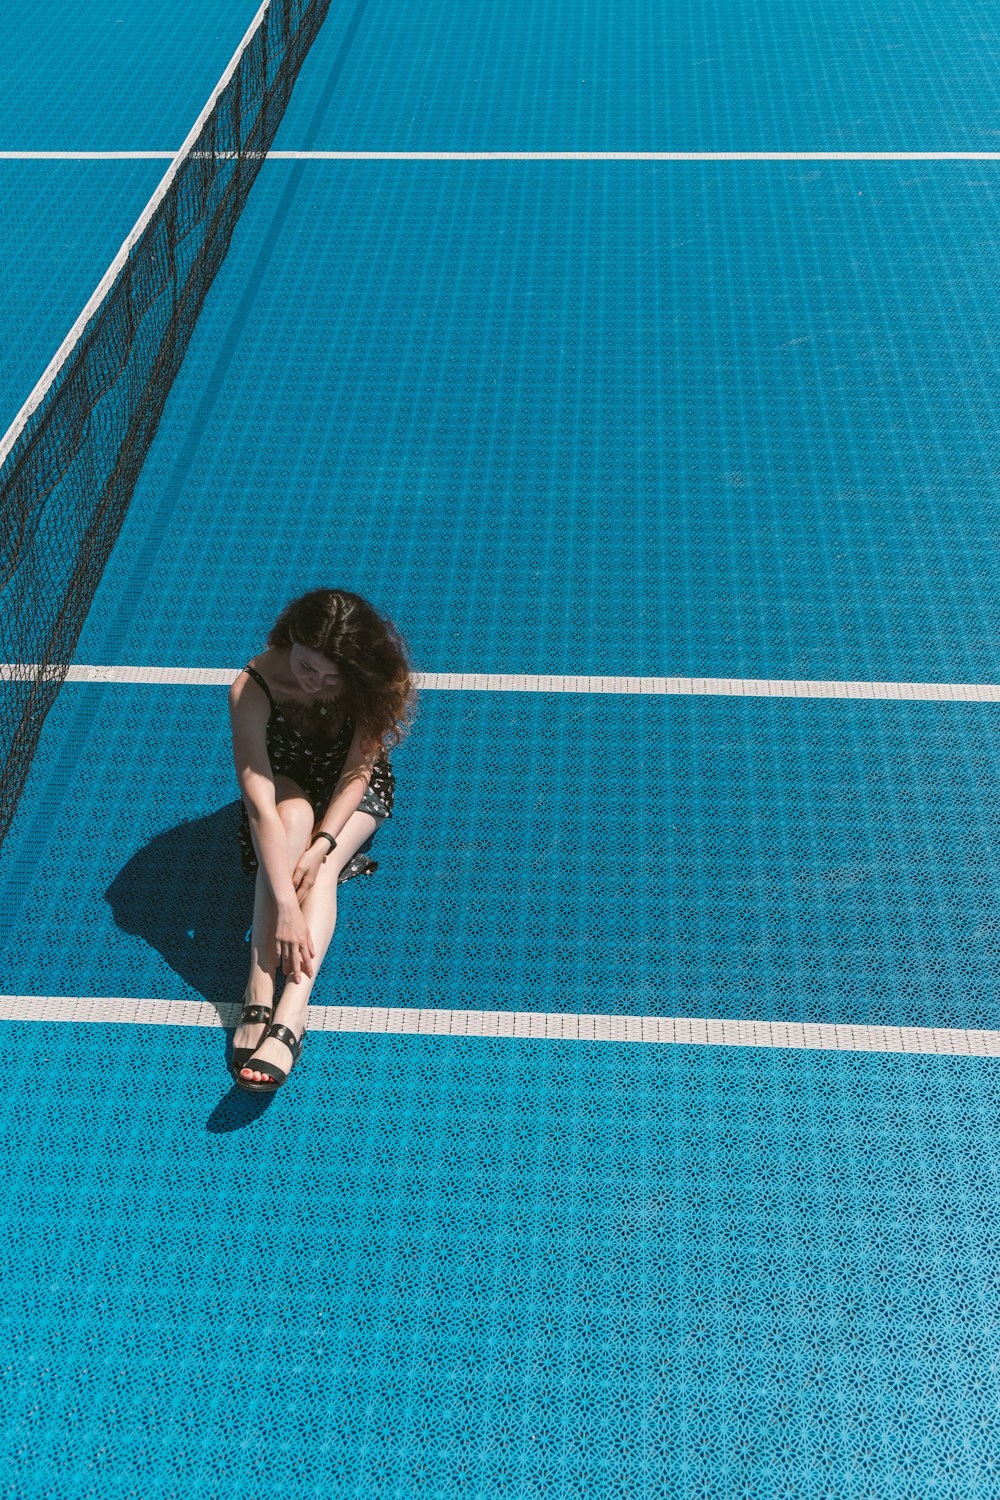 woman sitting on a tennis court